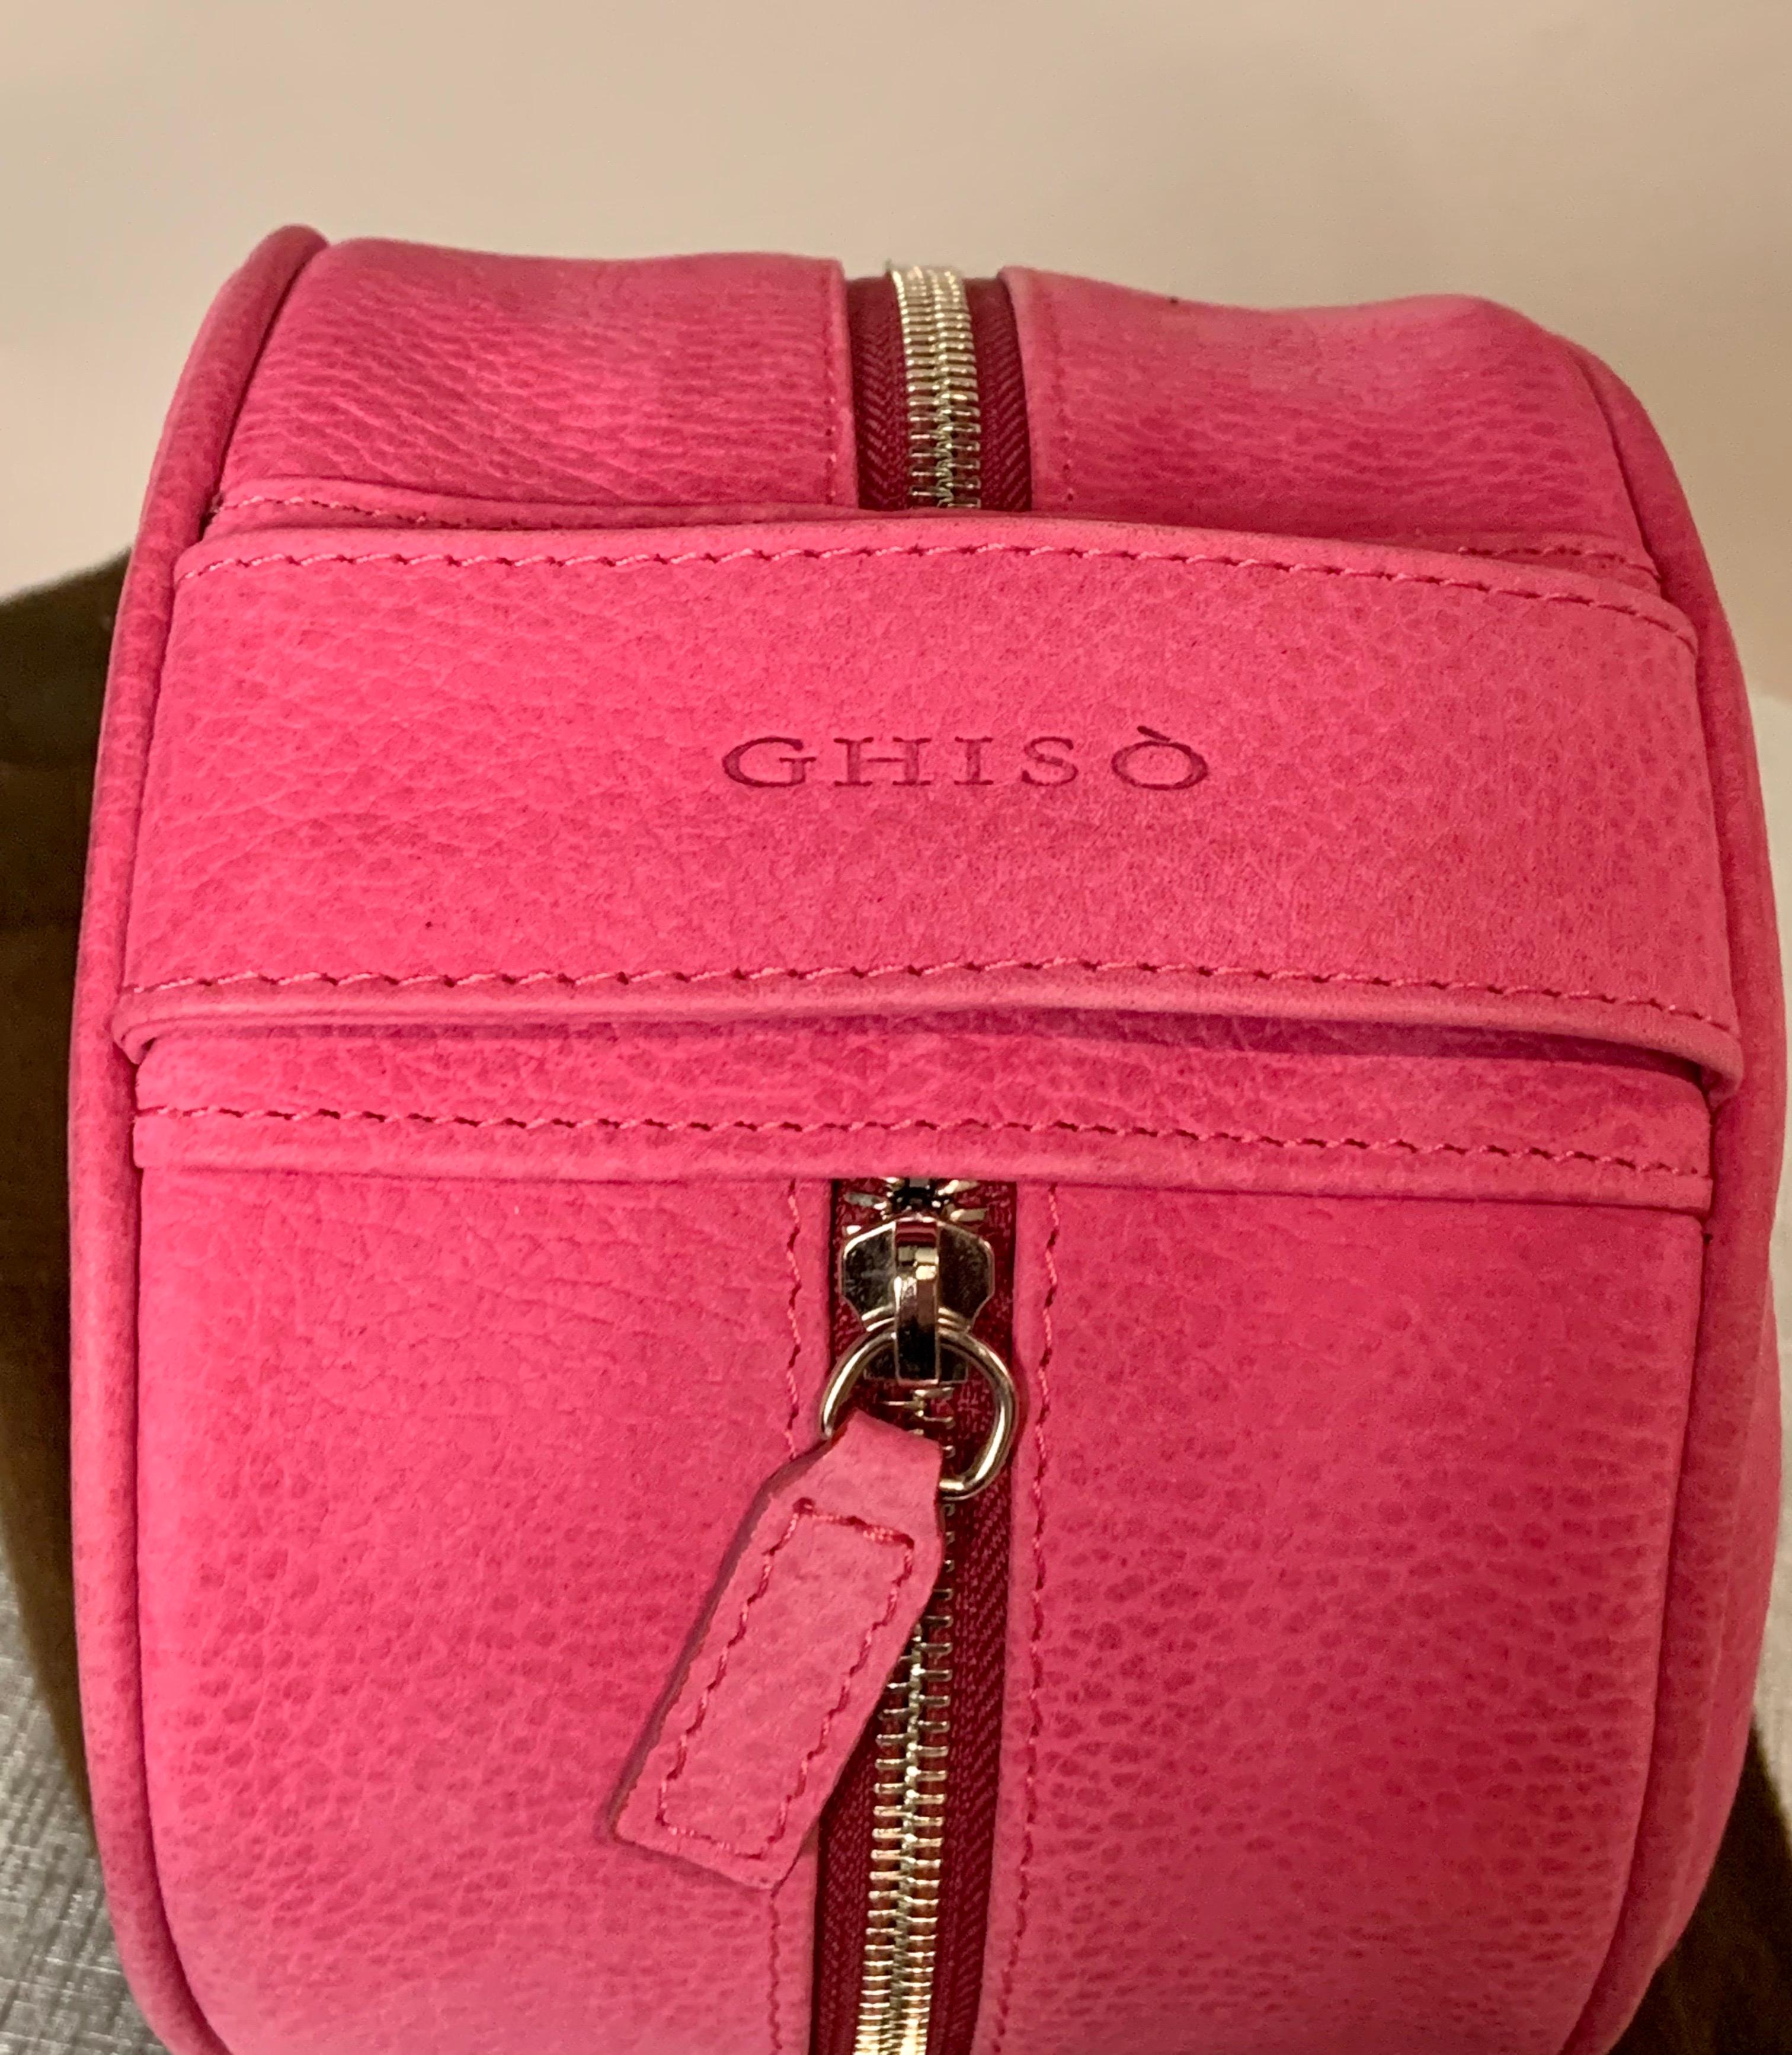 This is the cutest pet accessory, a Barbie pink leather case for your traveling pet. It zips open at the center, and one side has a shiny stainless steel pet food and/or water bowl.  The other side has a pink leather strap snapped in place  to